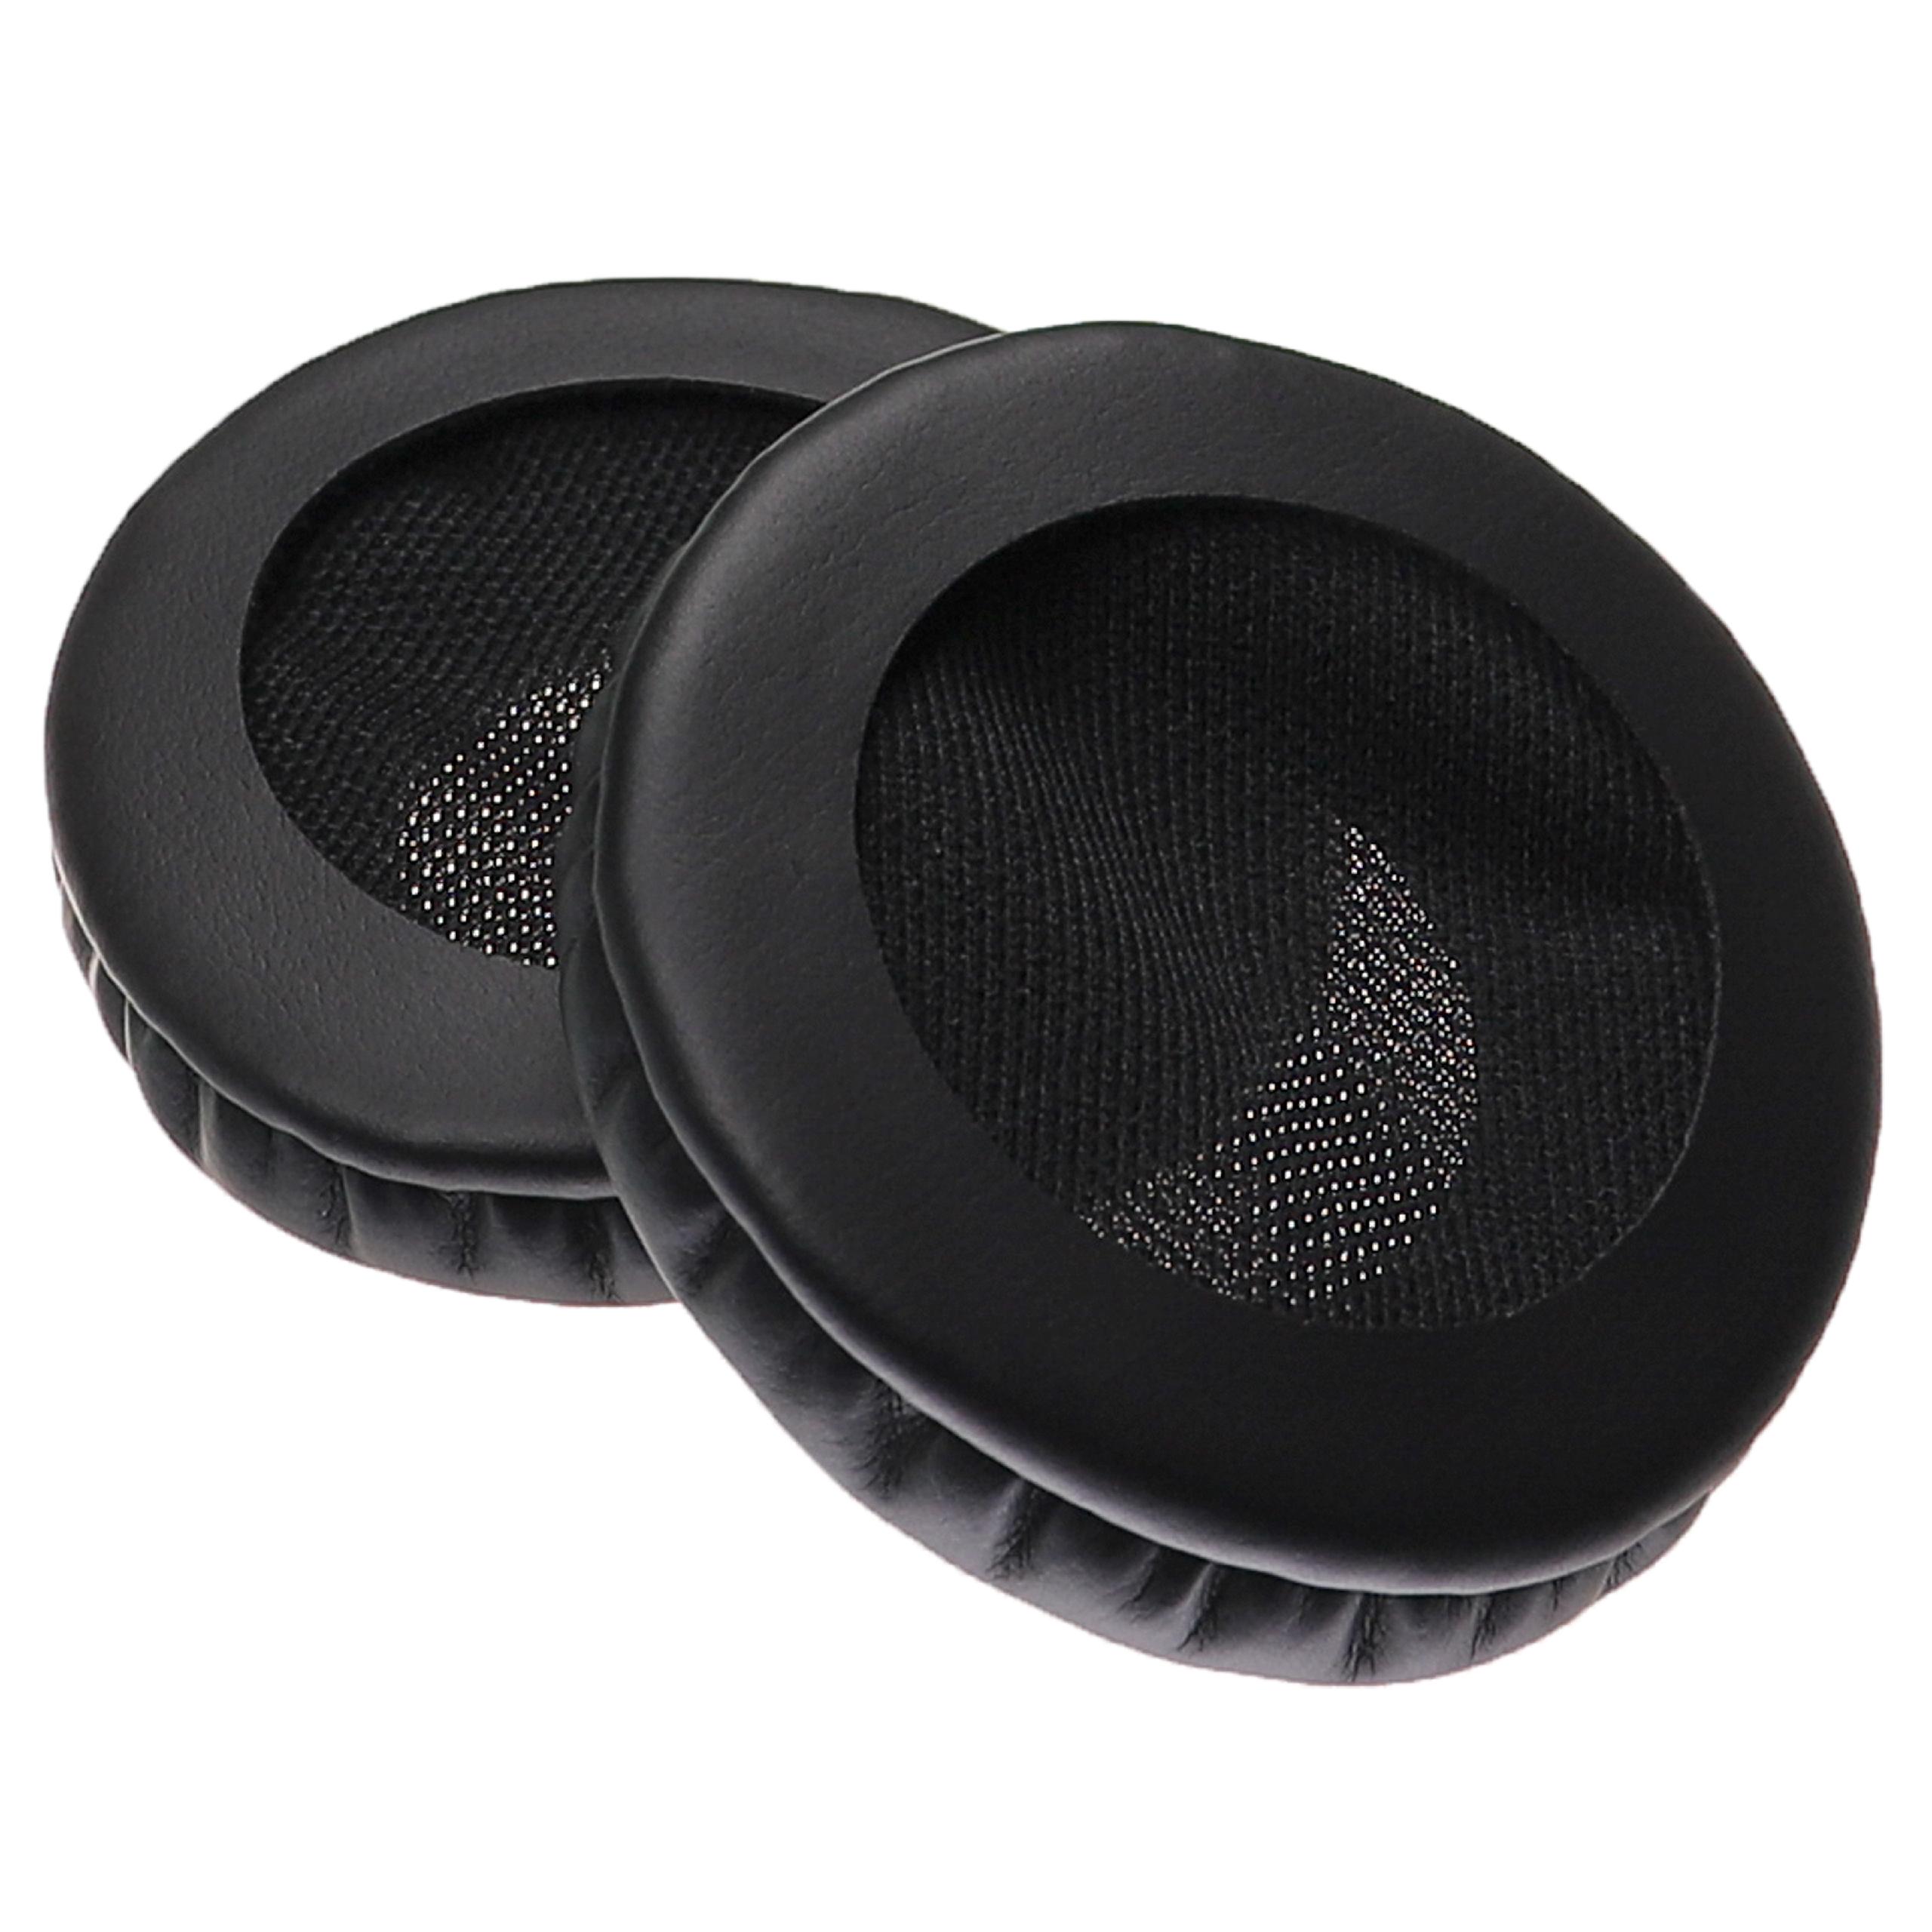 Ear Pads suitable for Sony MDR-V100 Headphones etc. - silicone, 36 mm thick